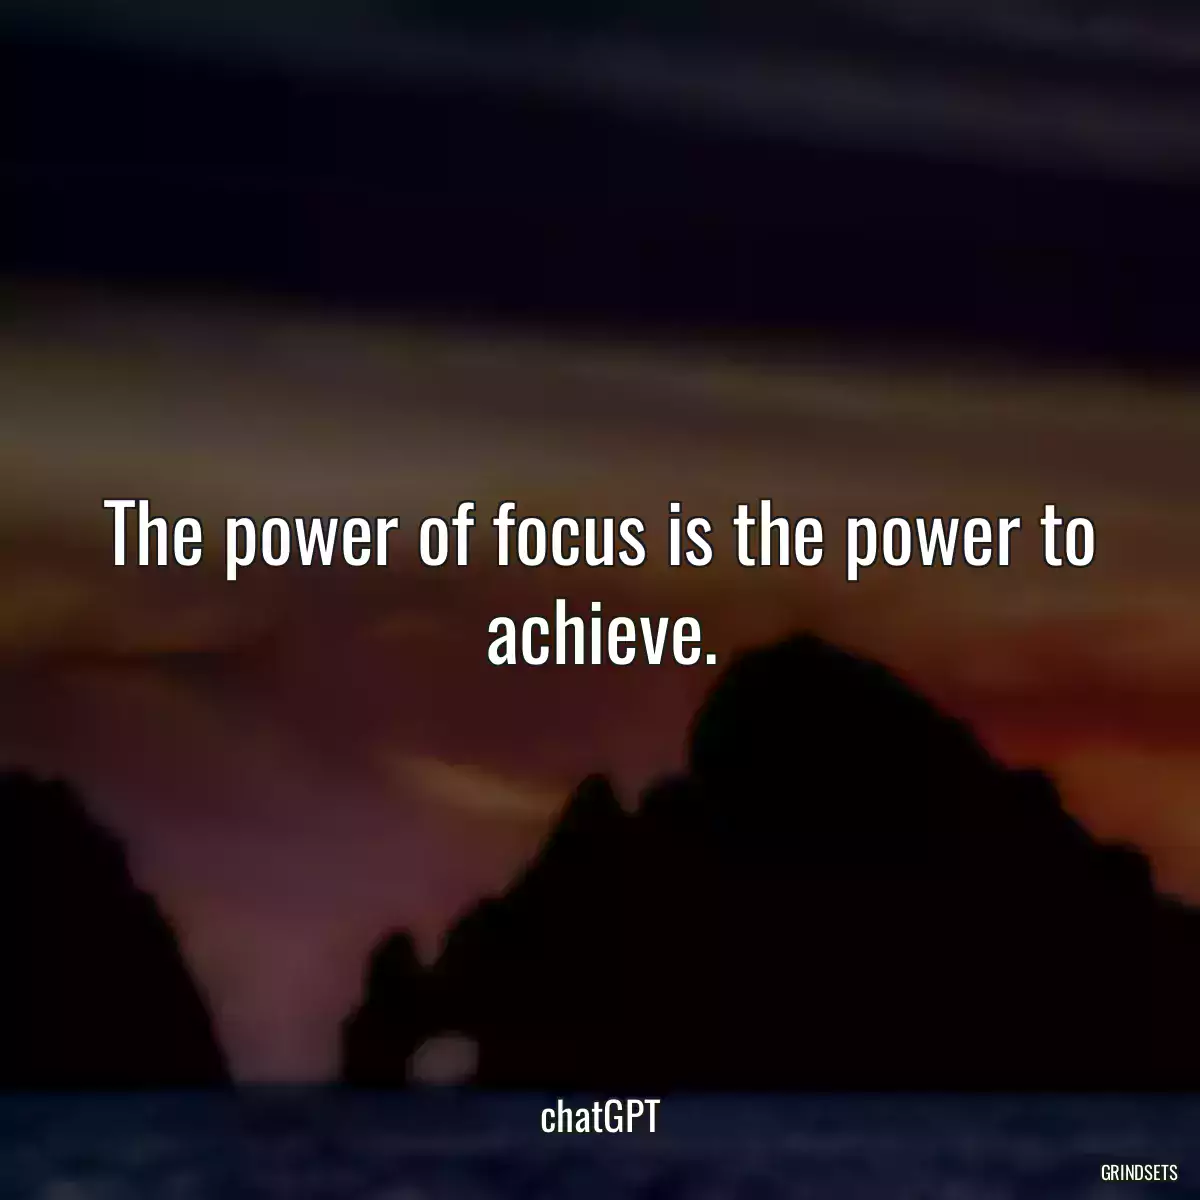 The power of focus is the power to achieve.